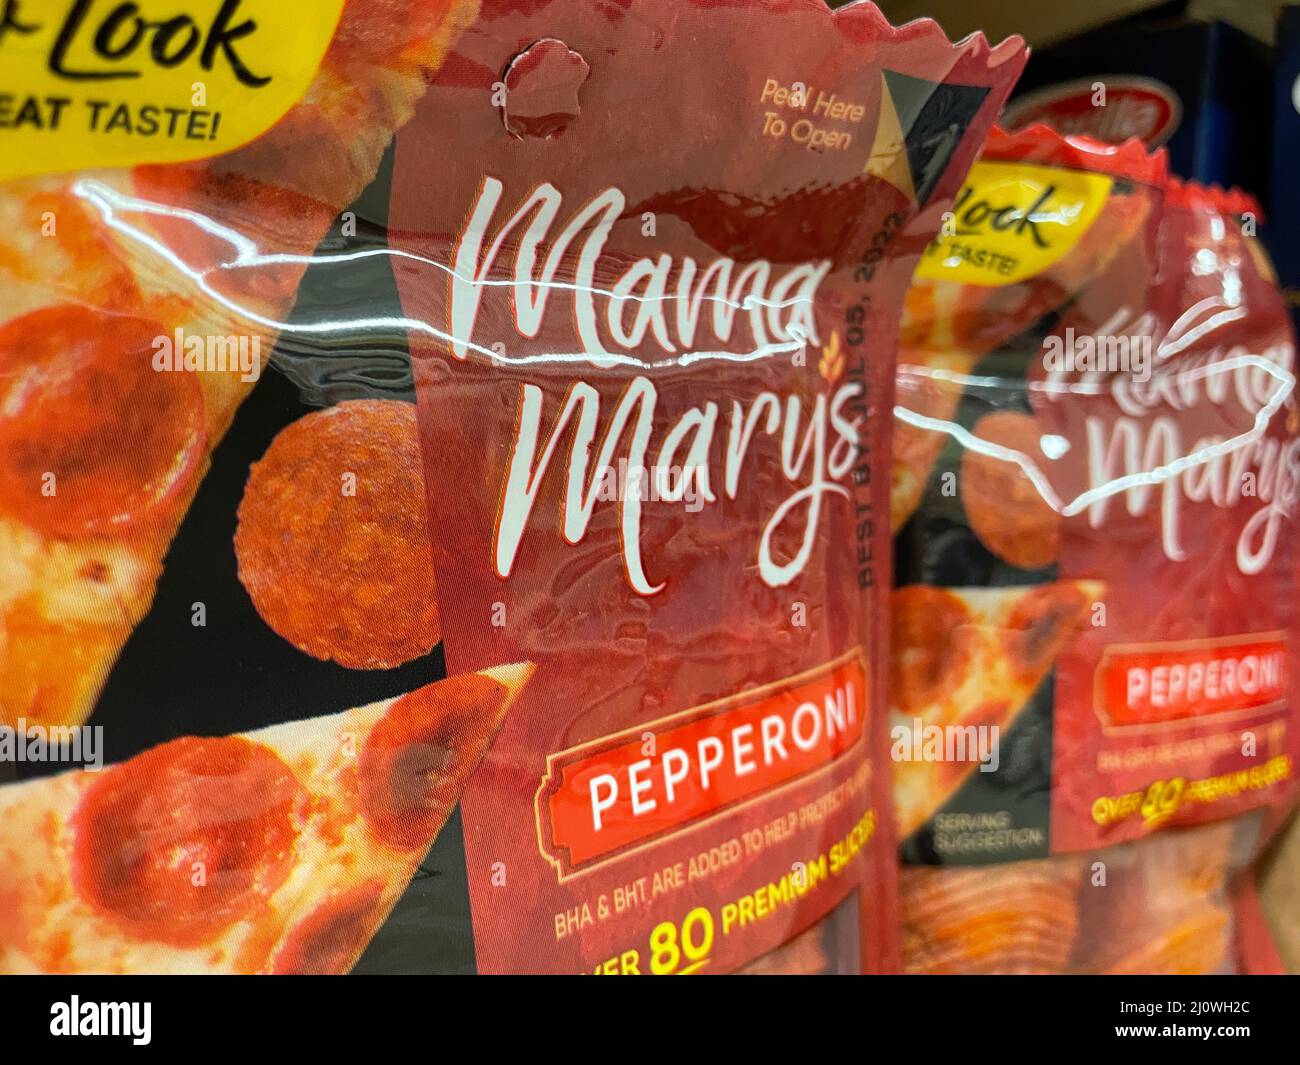 Augusta, Ga USA - 03 10 22: Pizza sauce kits on a retail store shelf Mary Mary pepperoni in a bag Stock Photo